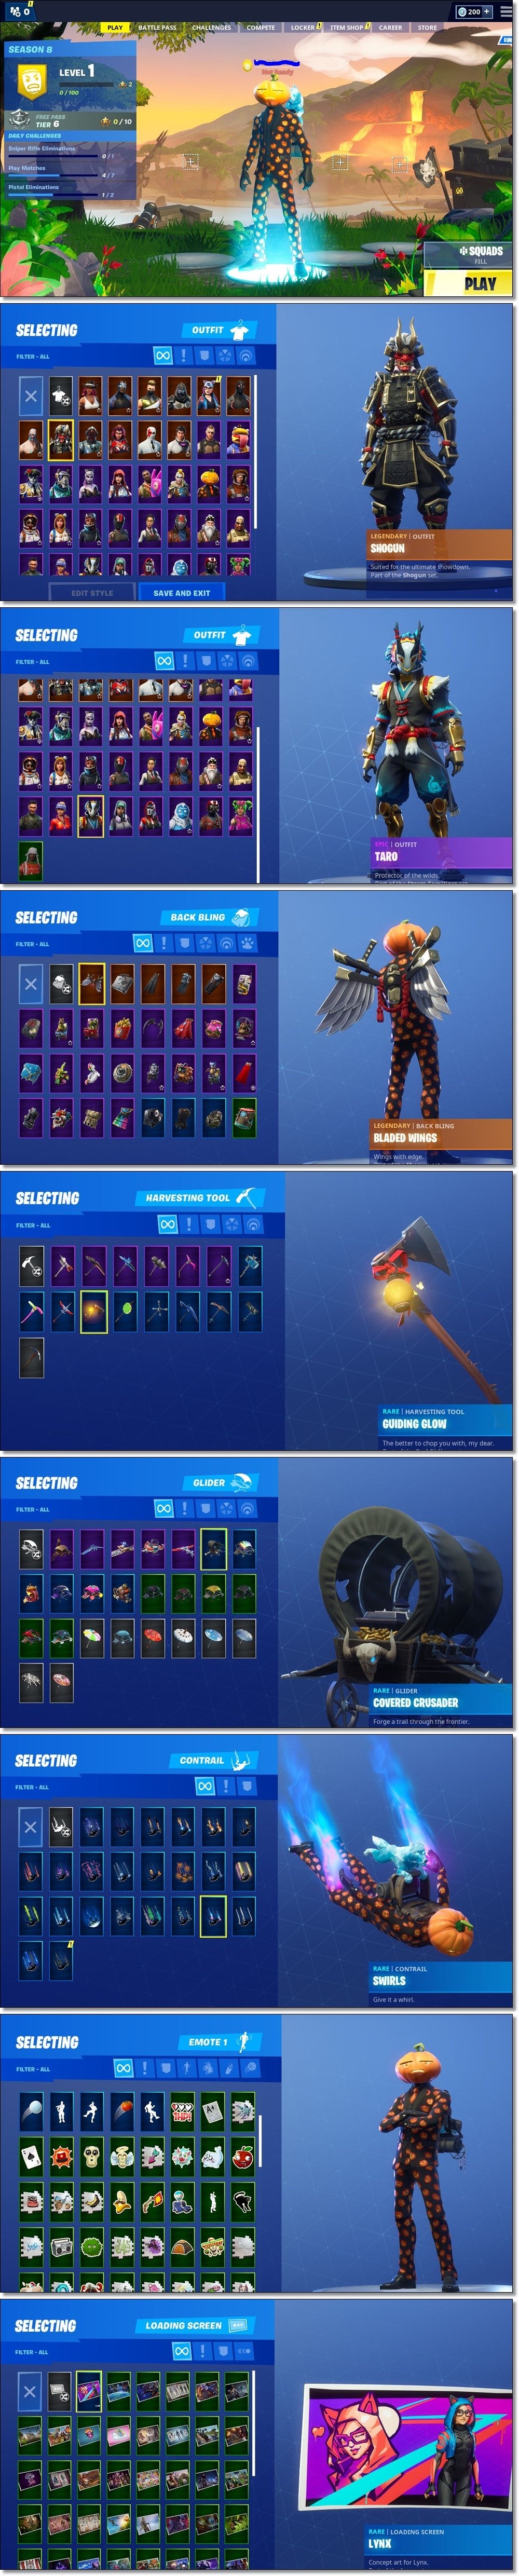 Fortnite Account / 39 Skins / Best Skins / Full Email Access No.22